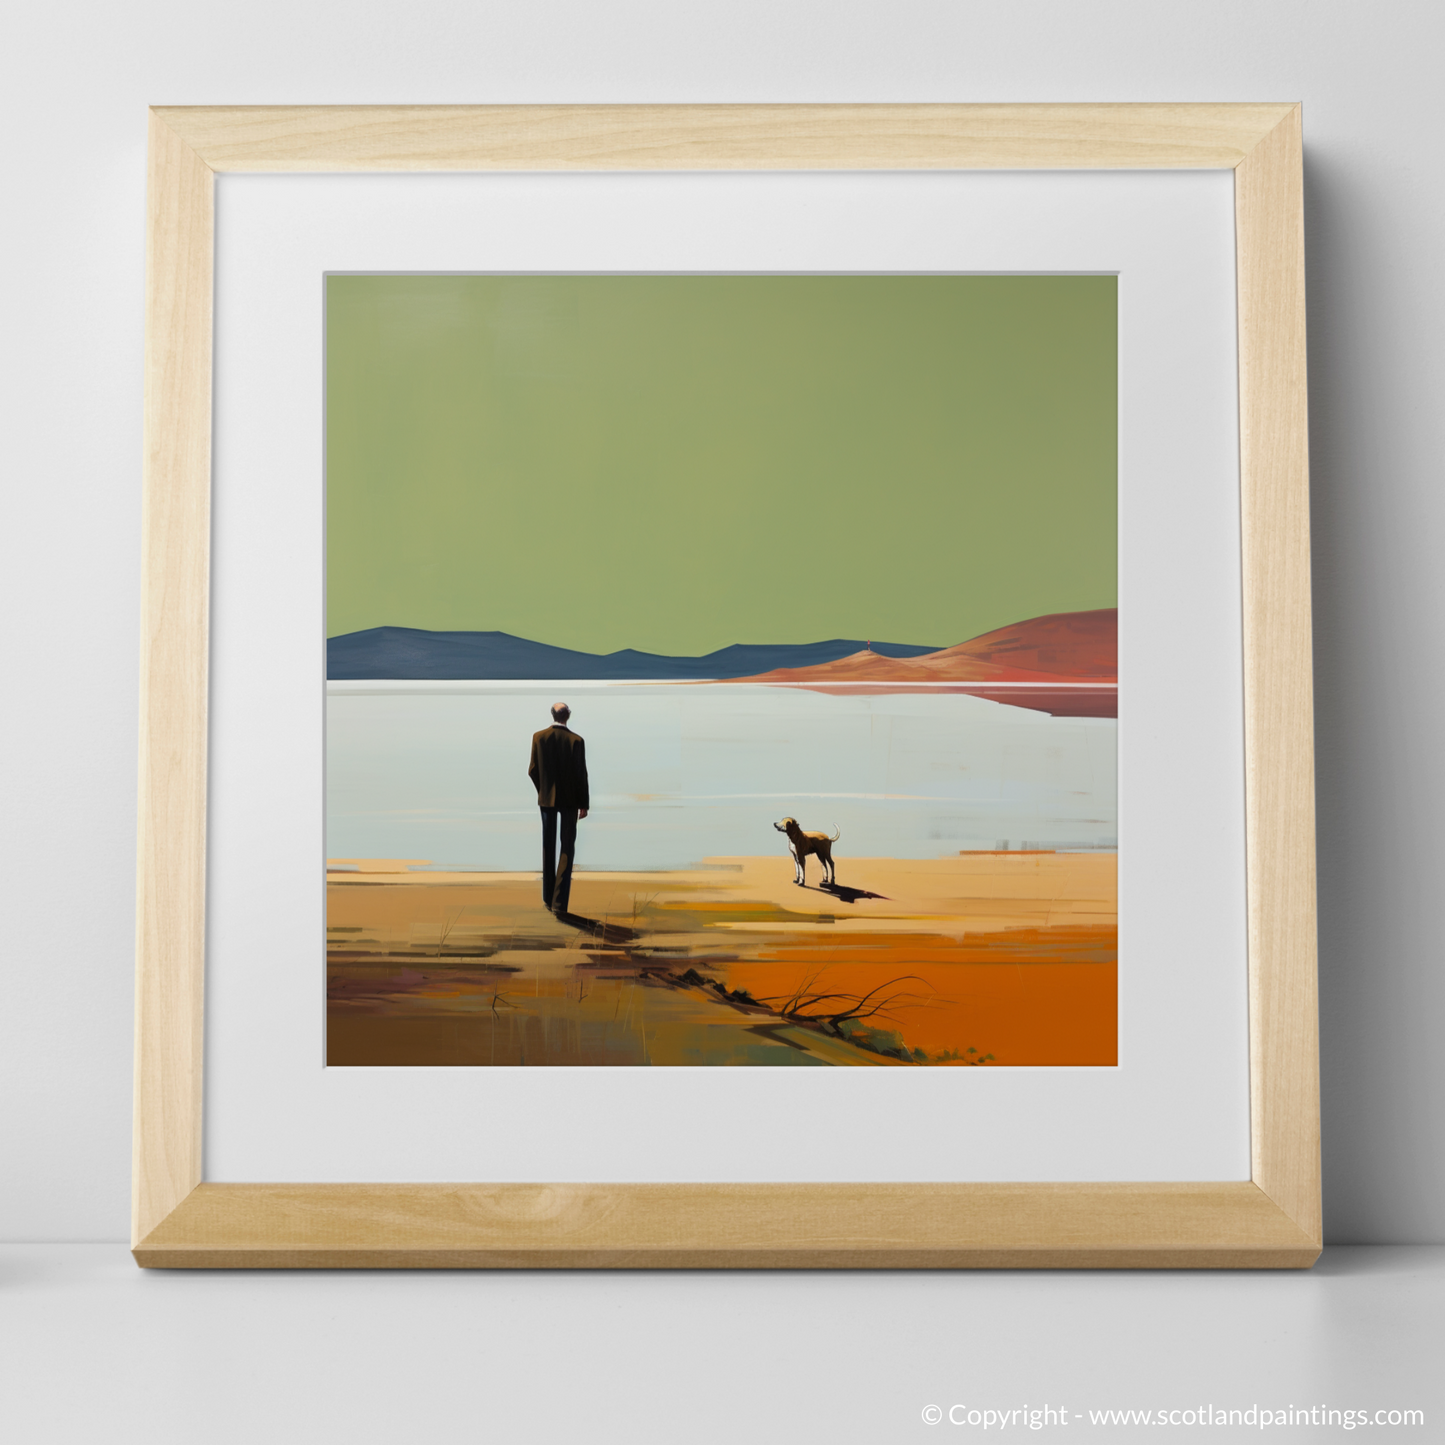 Art Print of A man walking dog at the side of Loch Lomond with a natural frame